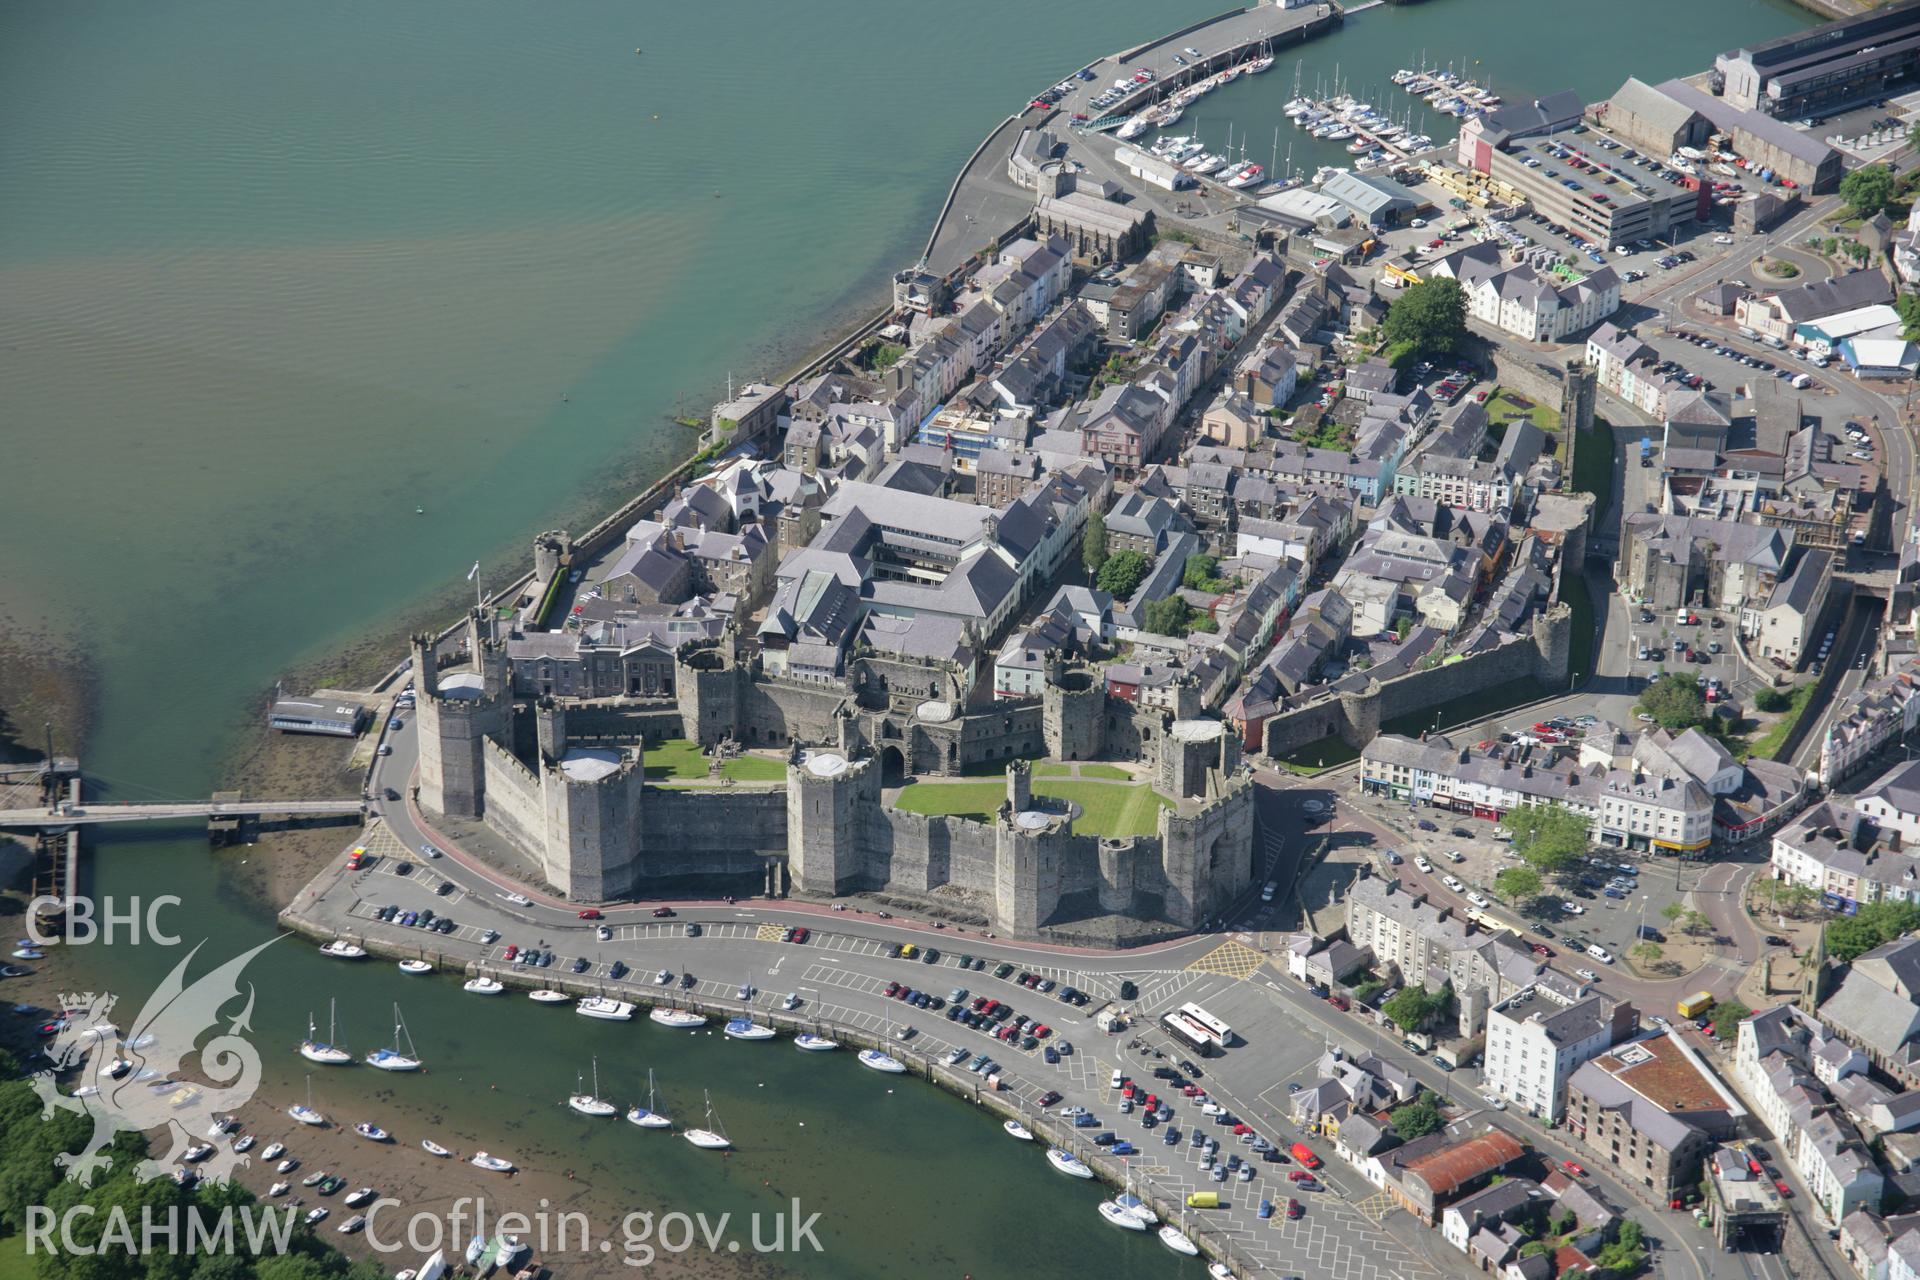 RCAHMW colour oblique aerial photograph of Caernarfon Castle and the walled town from the south. Taken on 14 June 2006 by Toby Driver.